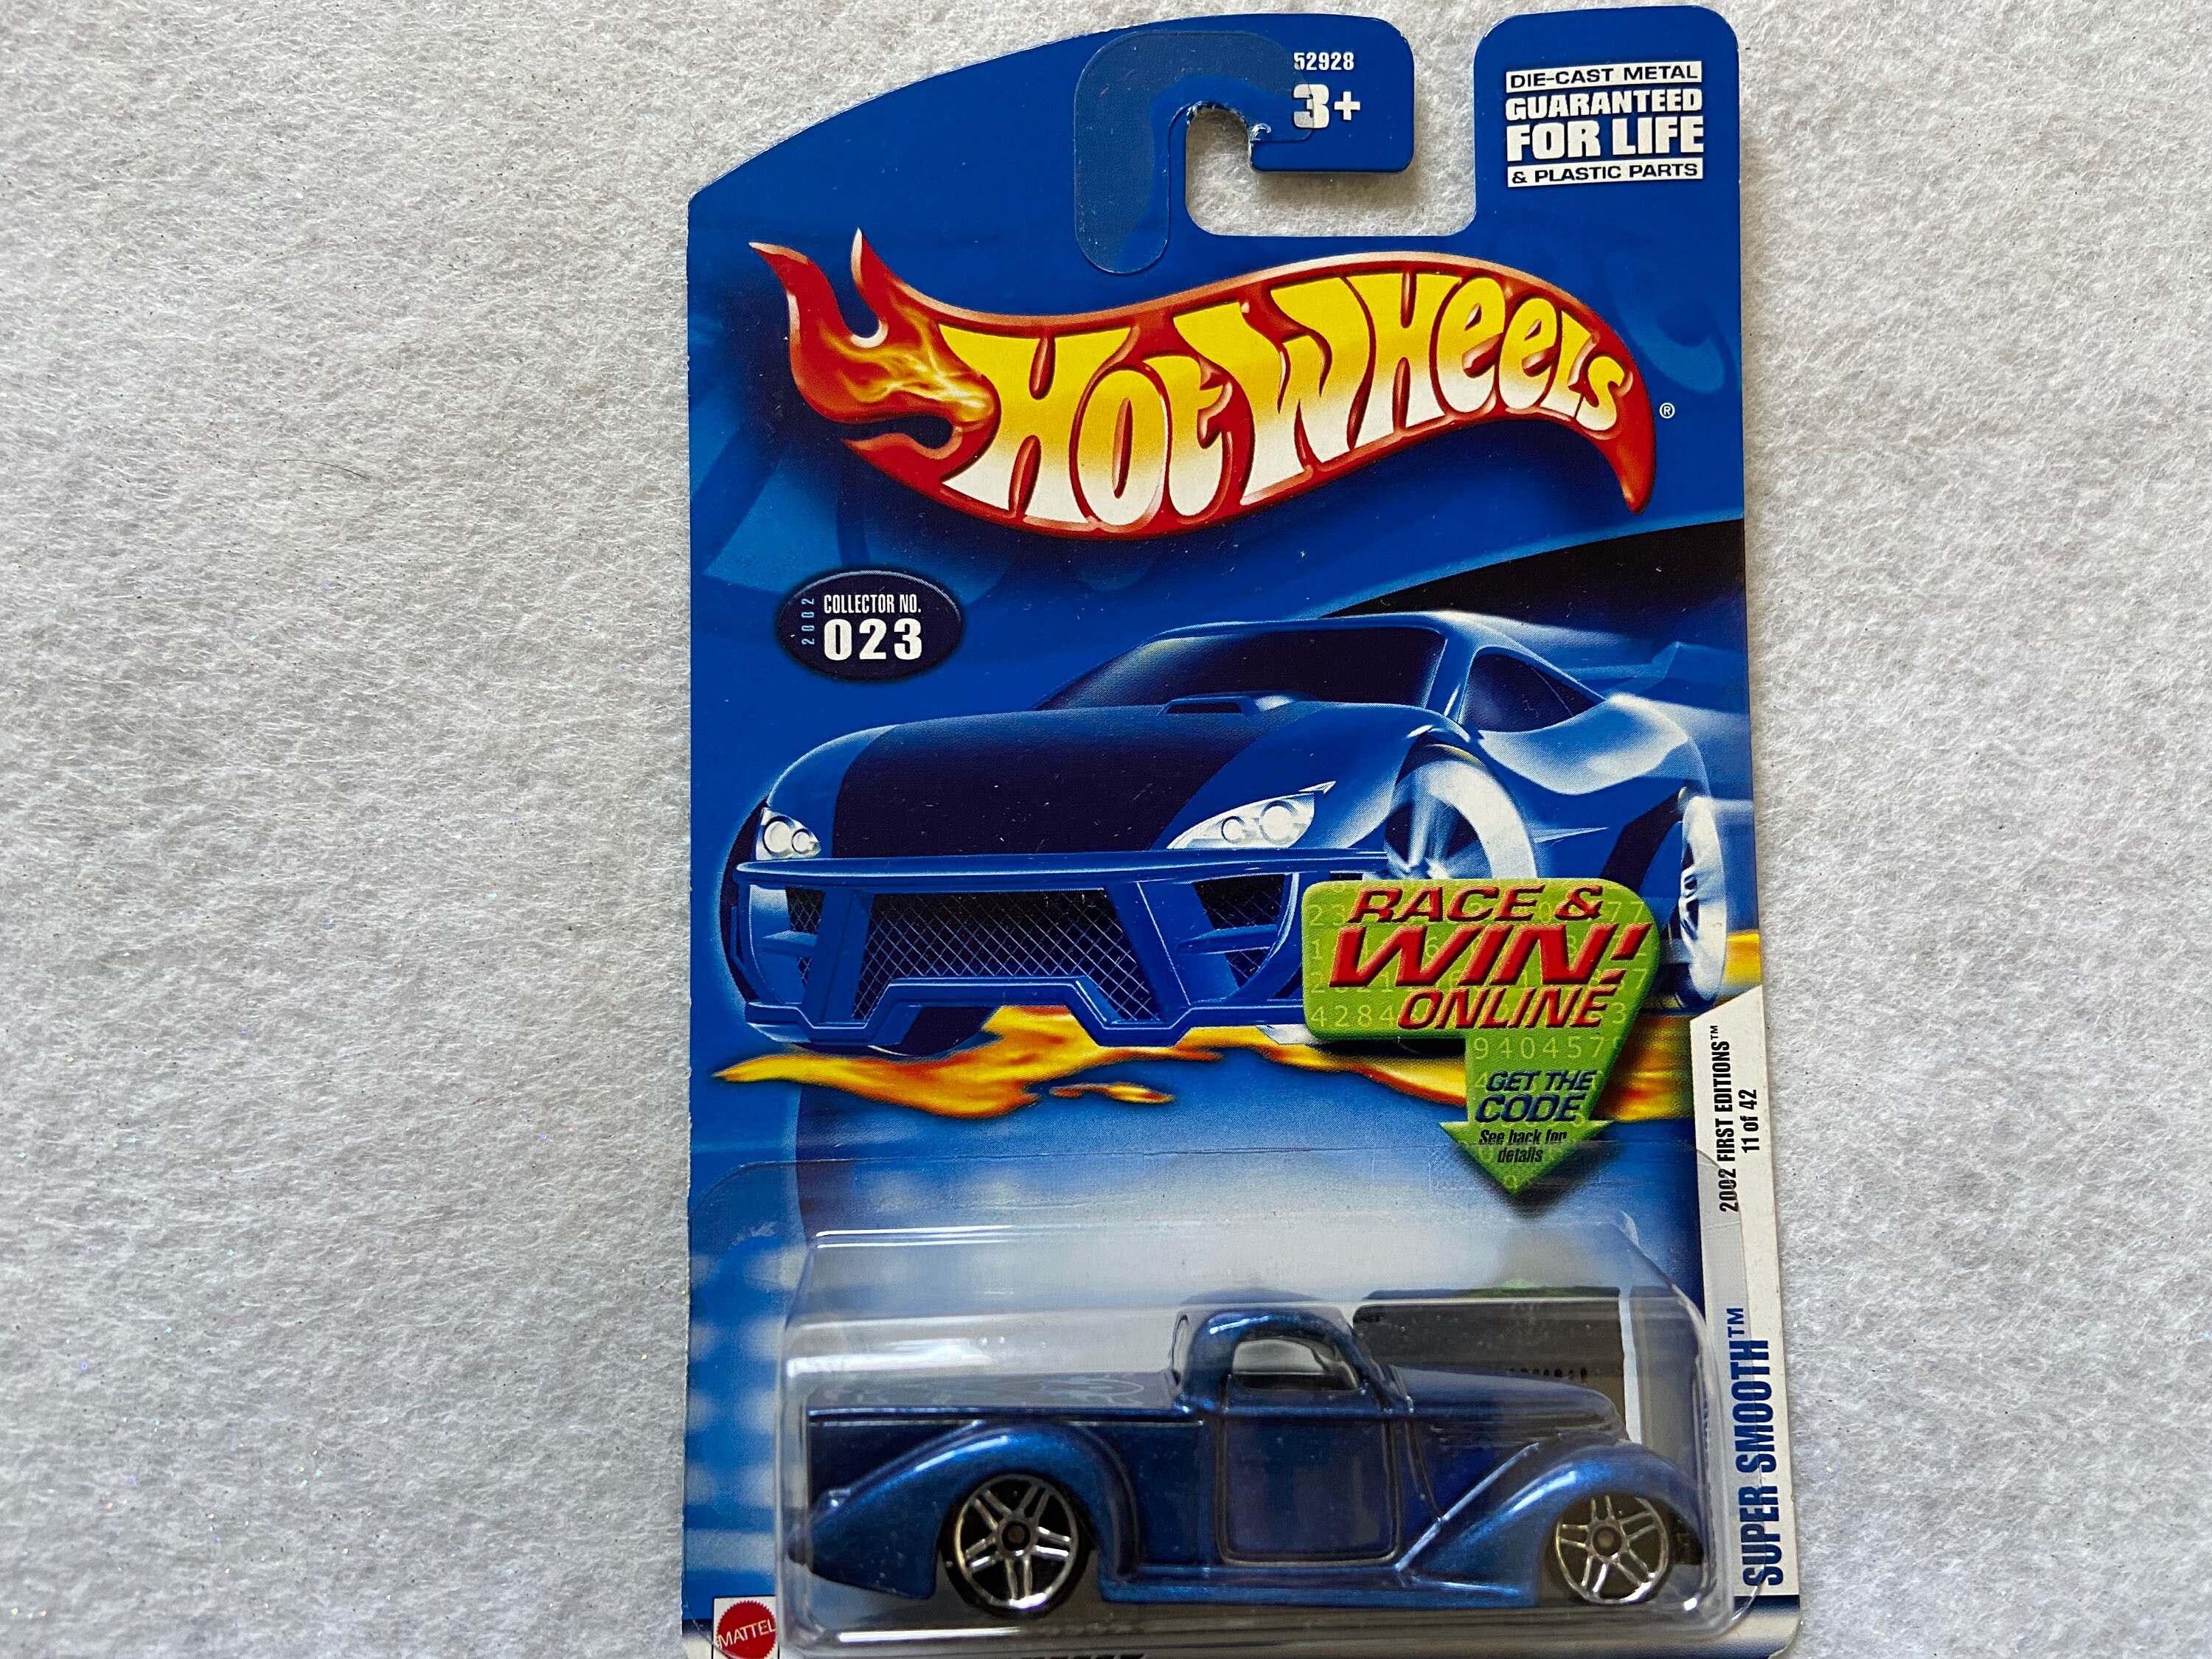 Super Smooth Collector 023 Hot Wheels | Etsy